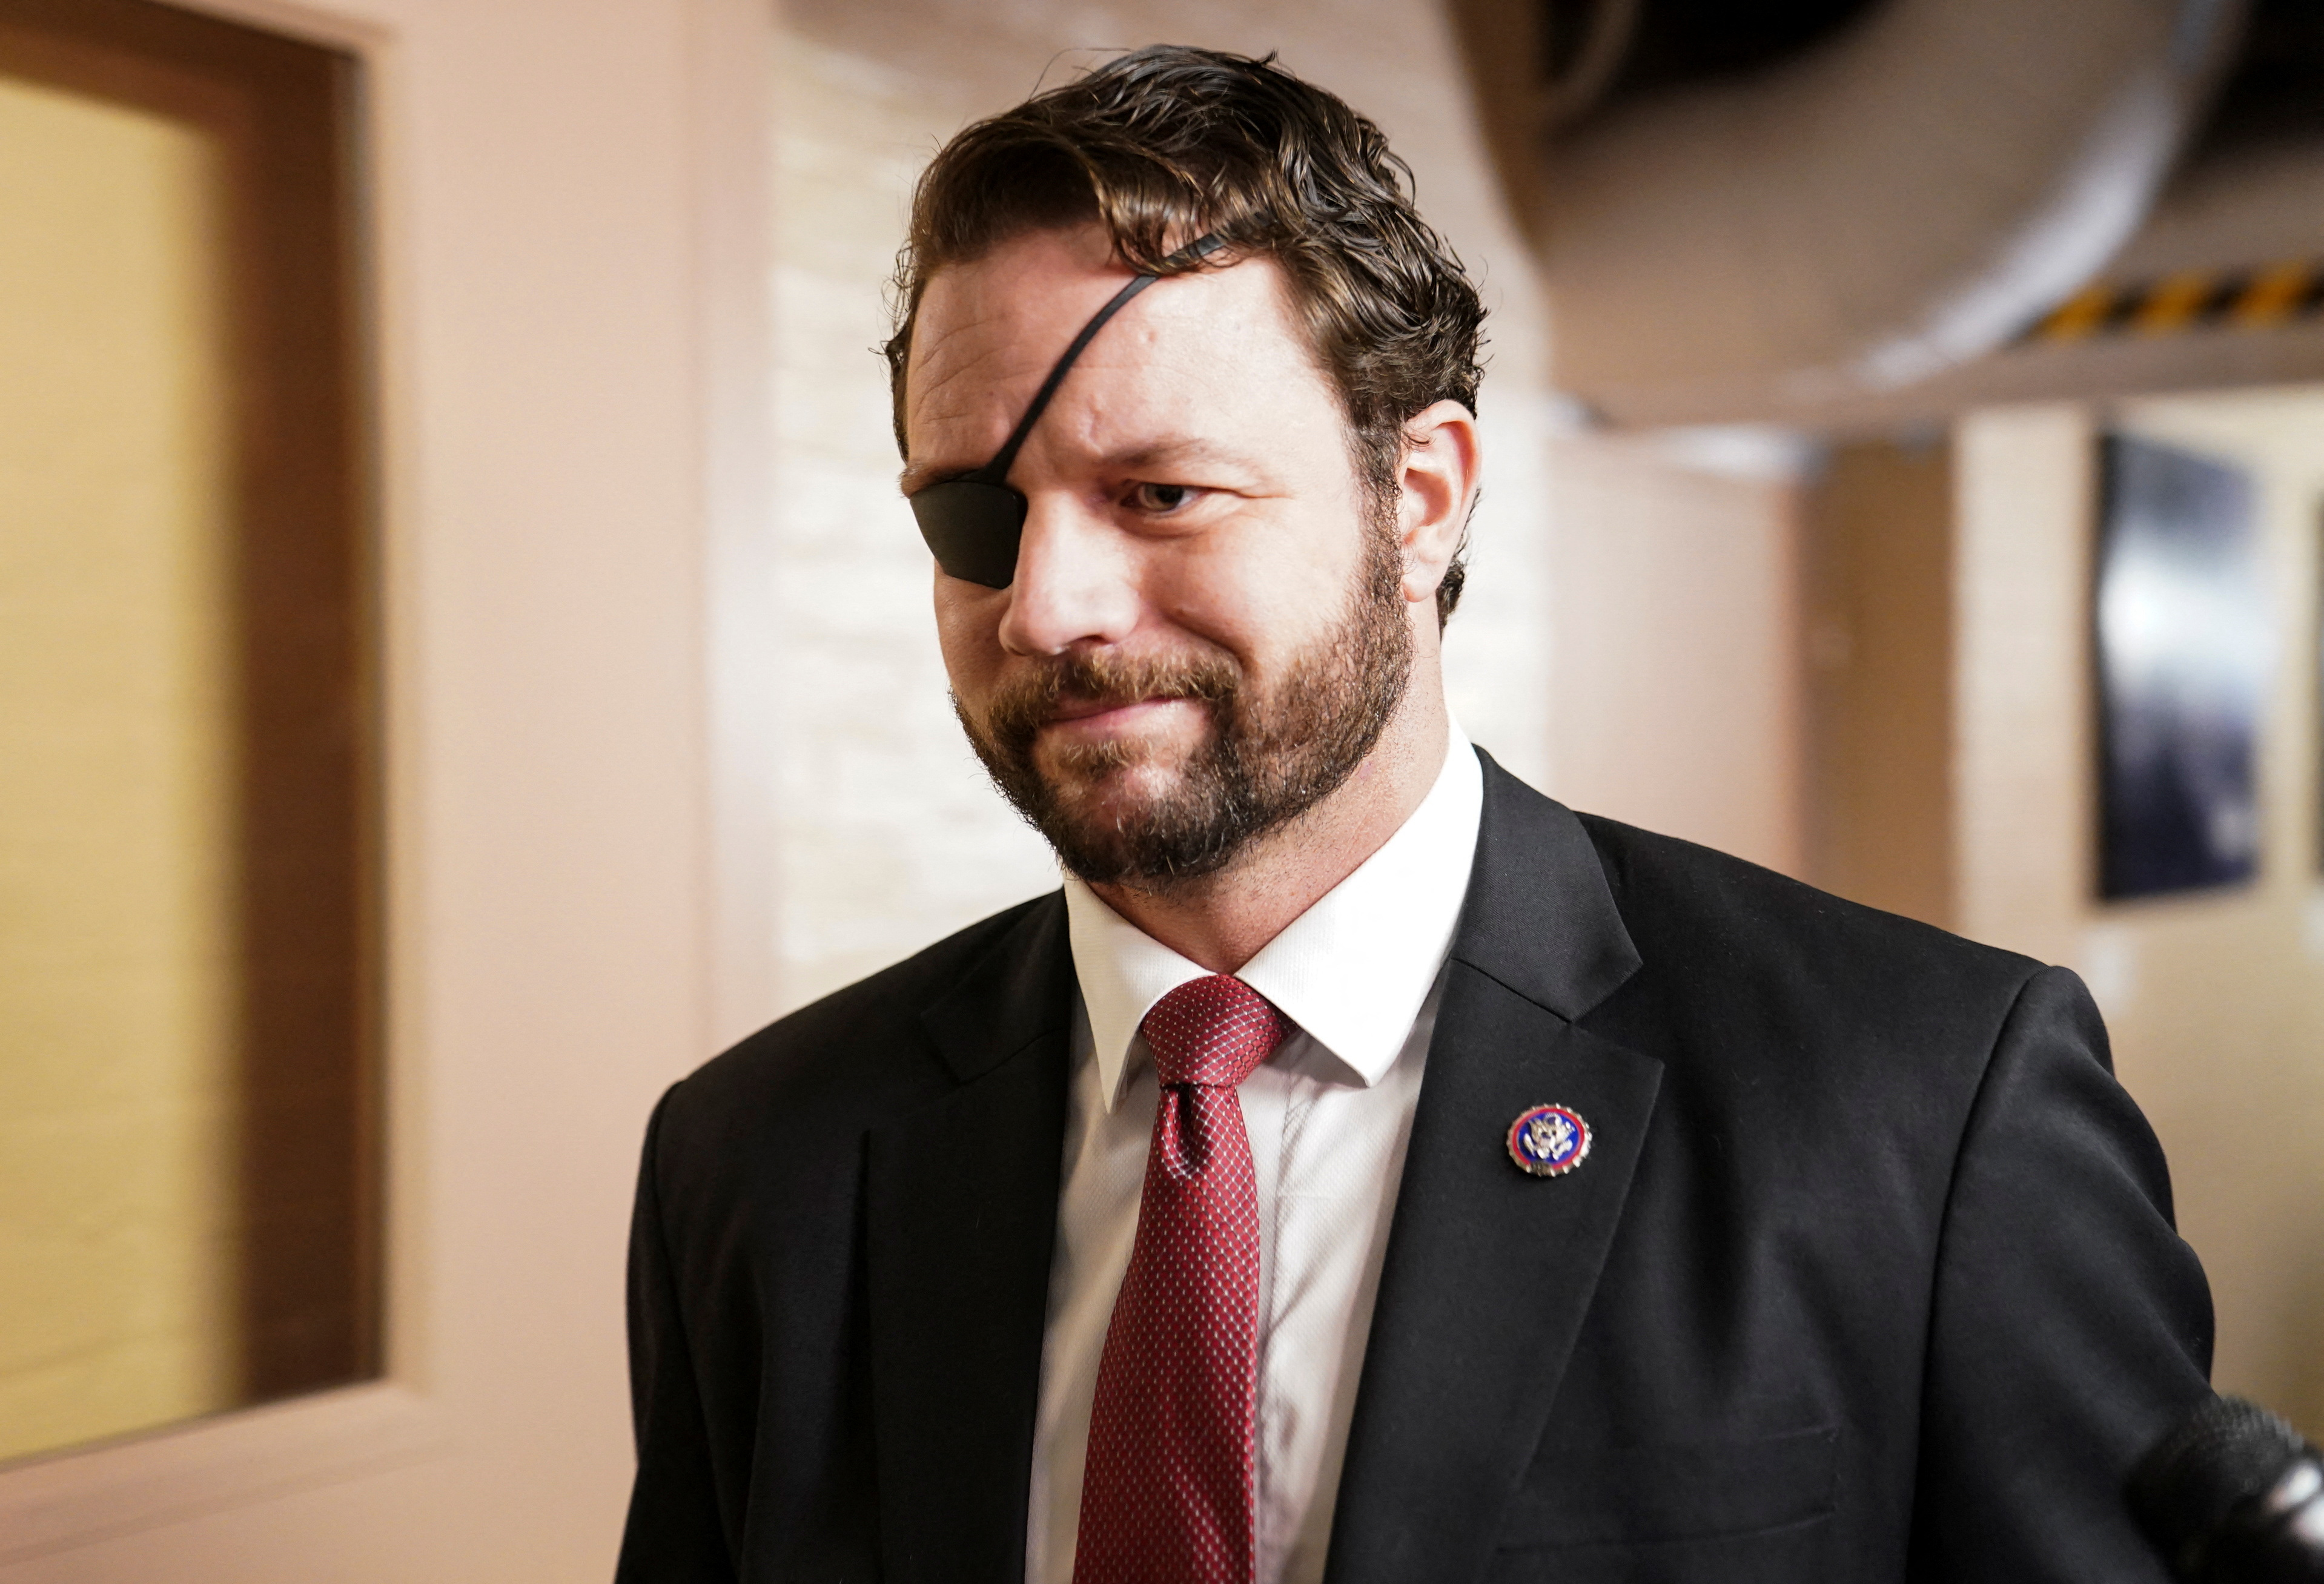 US Rep. Dan Crenshaw (R-TX) walks to a House GOP Caucus meeting at the US Capitol on the first day of the new Congress in Washington, US, January 3, 2023. REUTERS/Jon Cherry